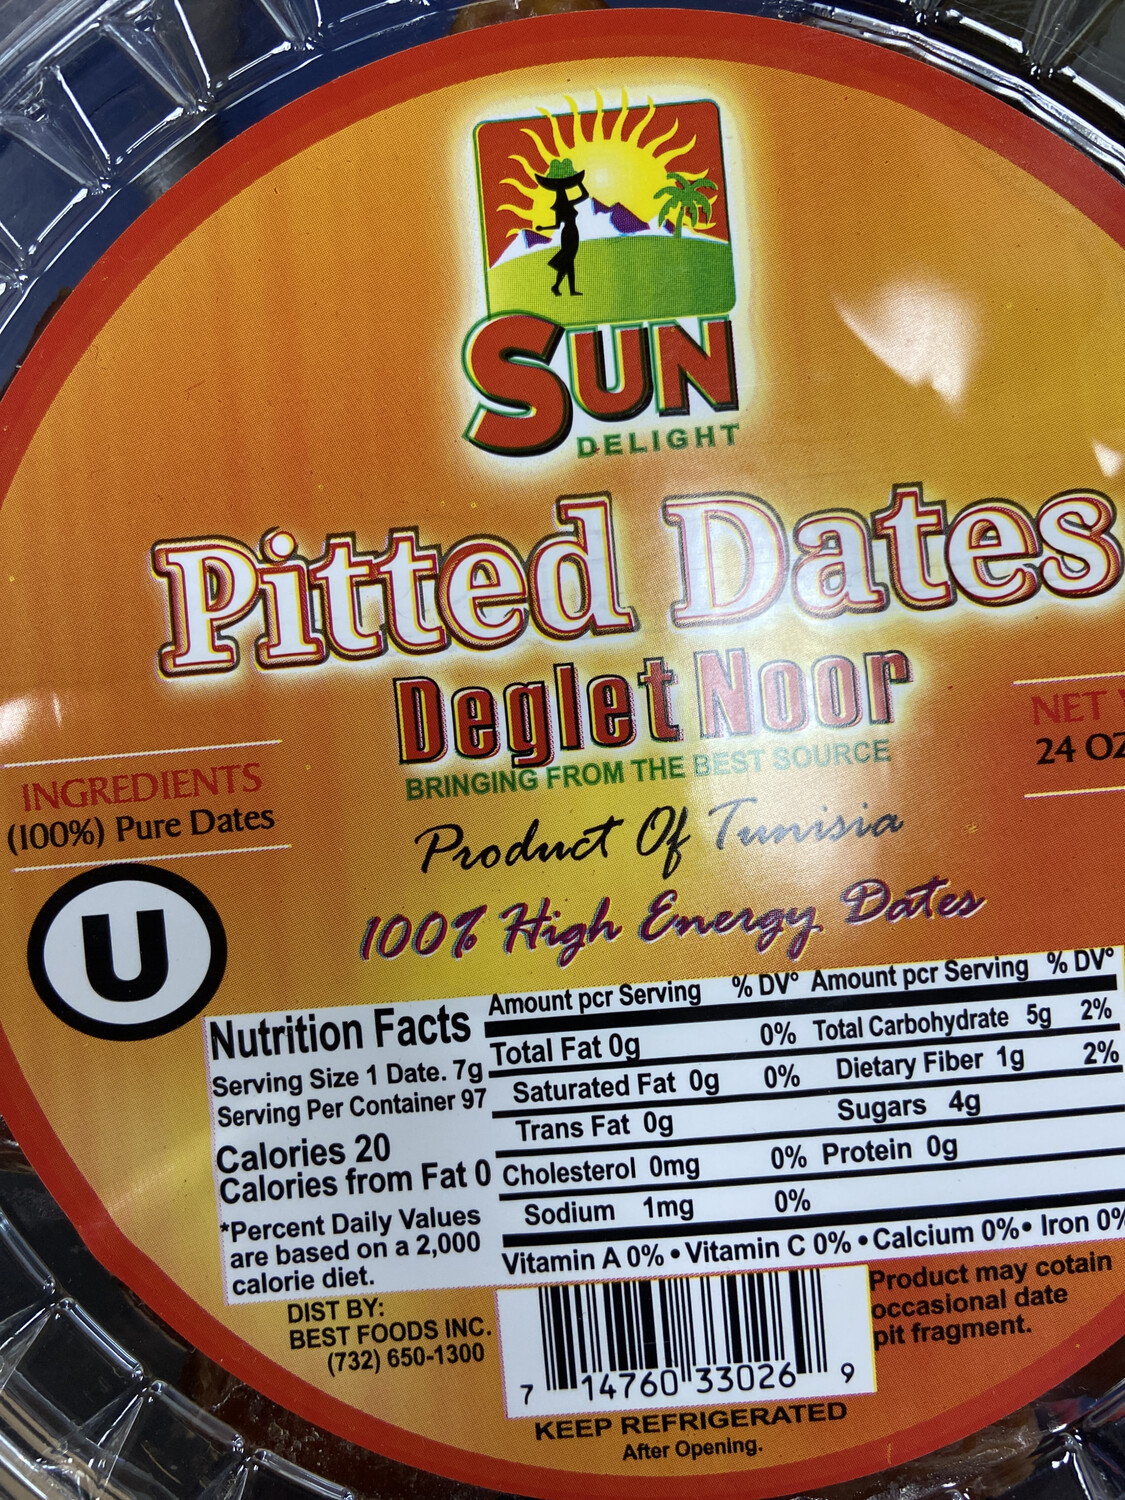 Sun Pitted Dates Delight 24oz